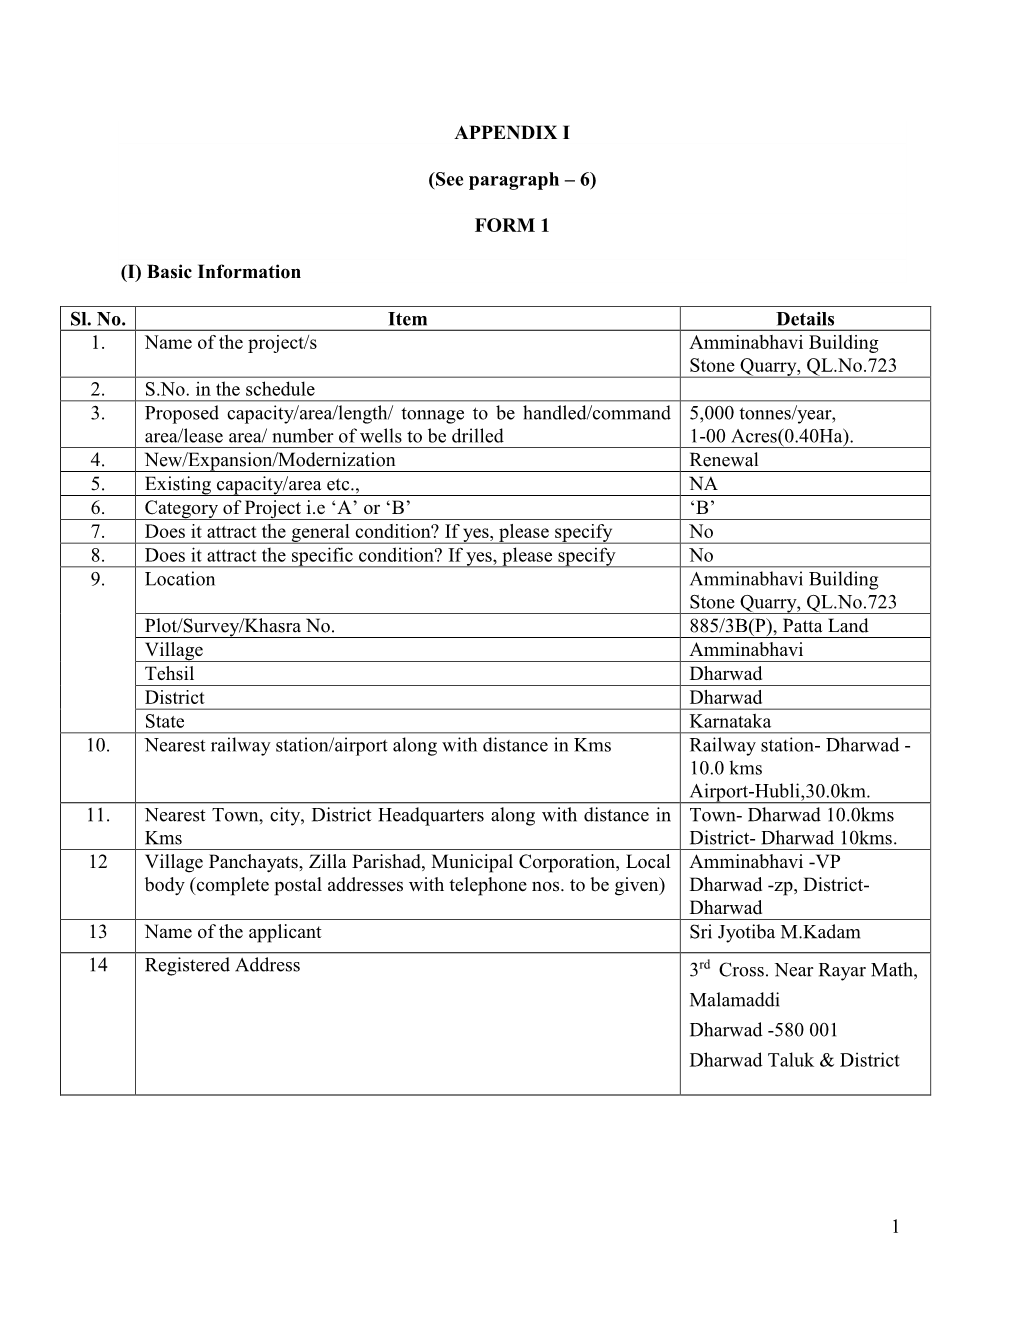 1 APPENDIX I (See Paragraph – 6) FORM 1 (I) Basic Information Sl. No. Item Details 1. Name of the Project/S Amminabhavi Build